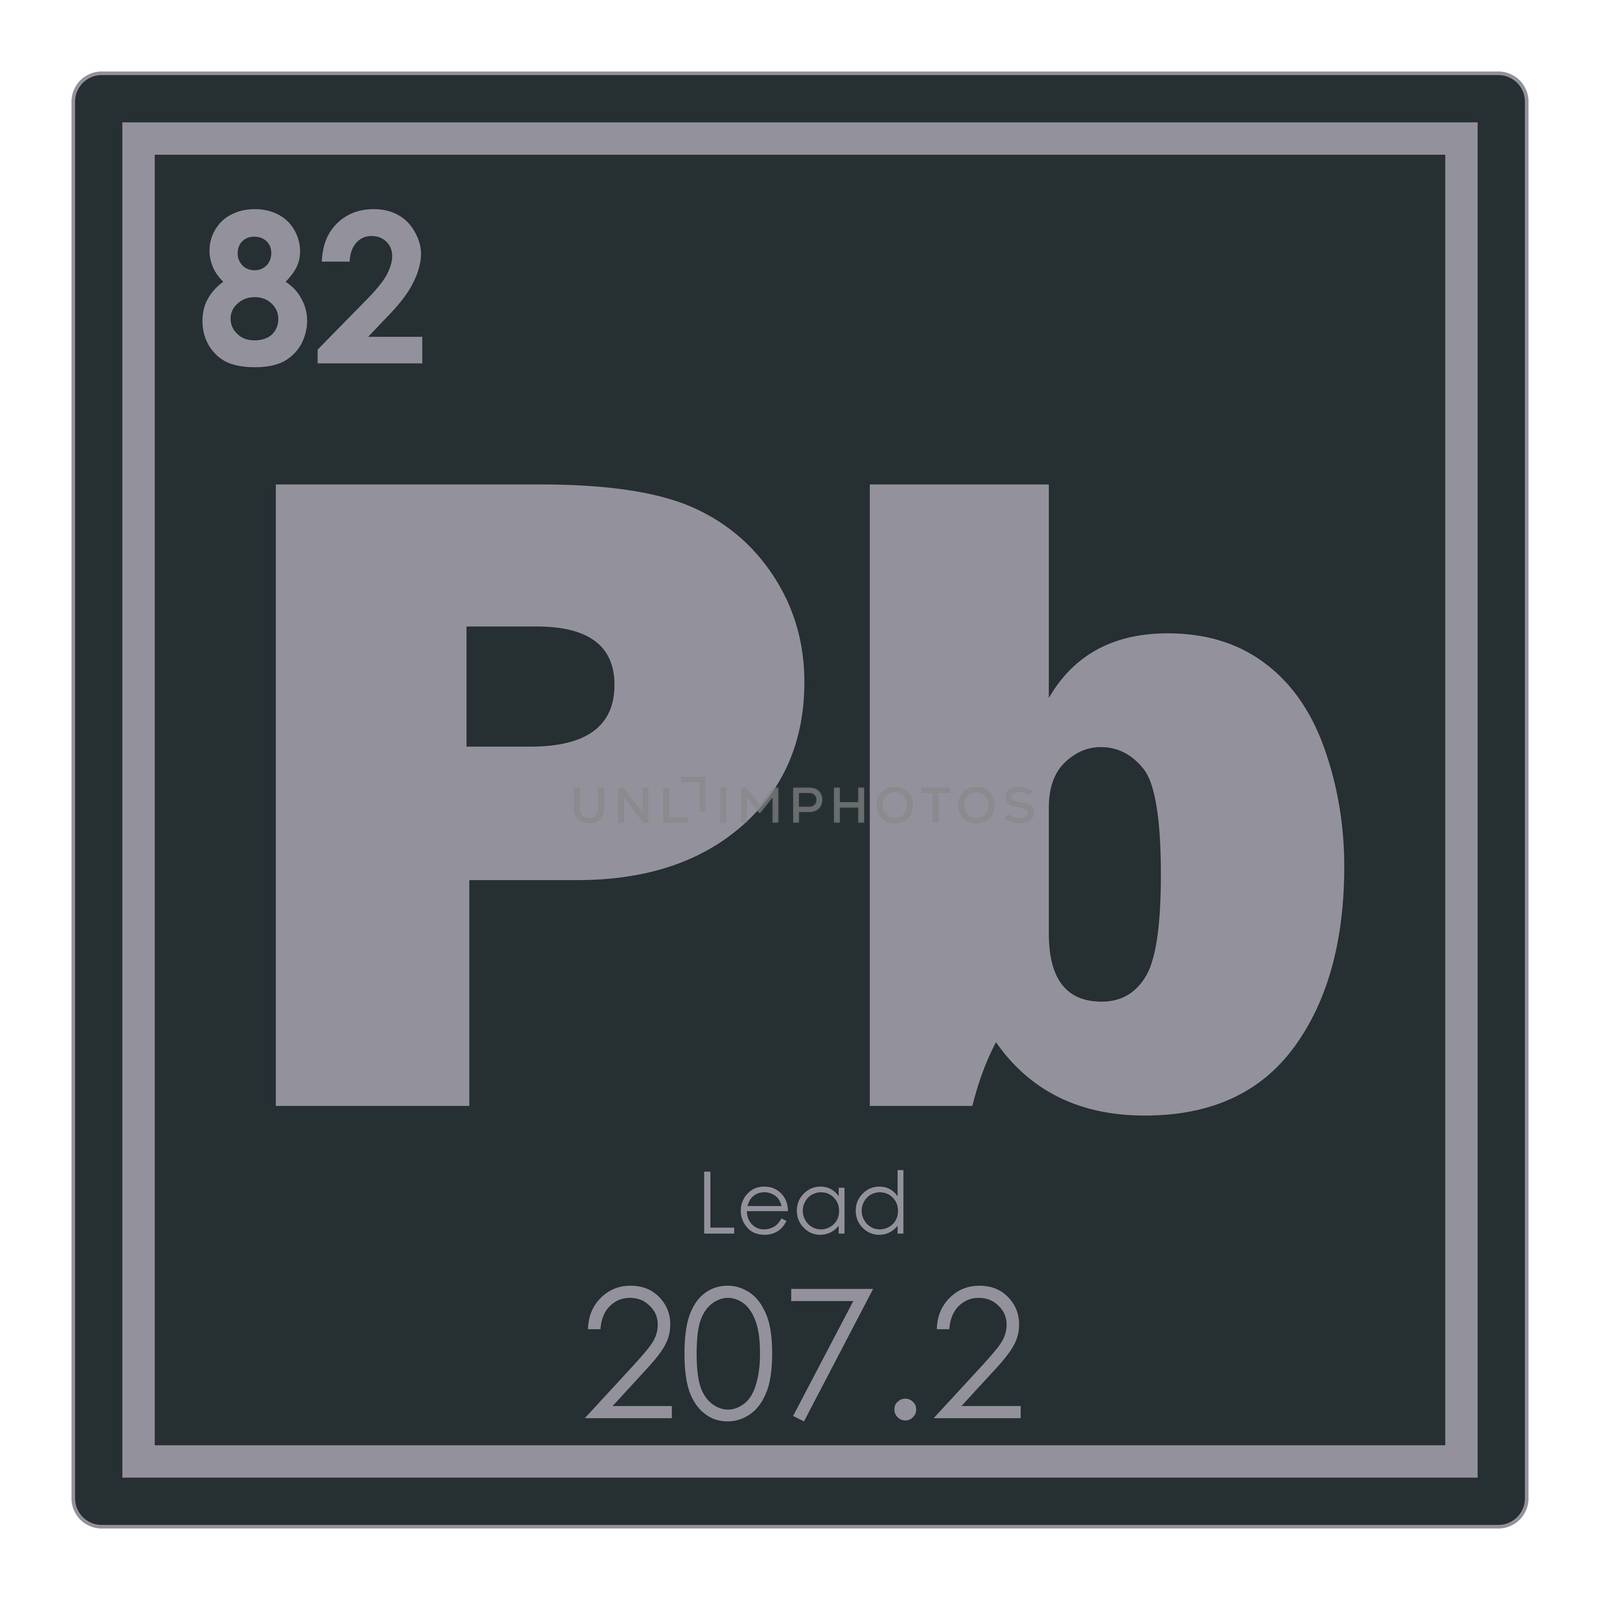 Lead chemical element by tony4urban